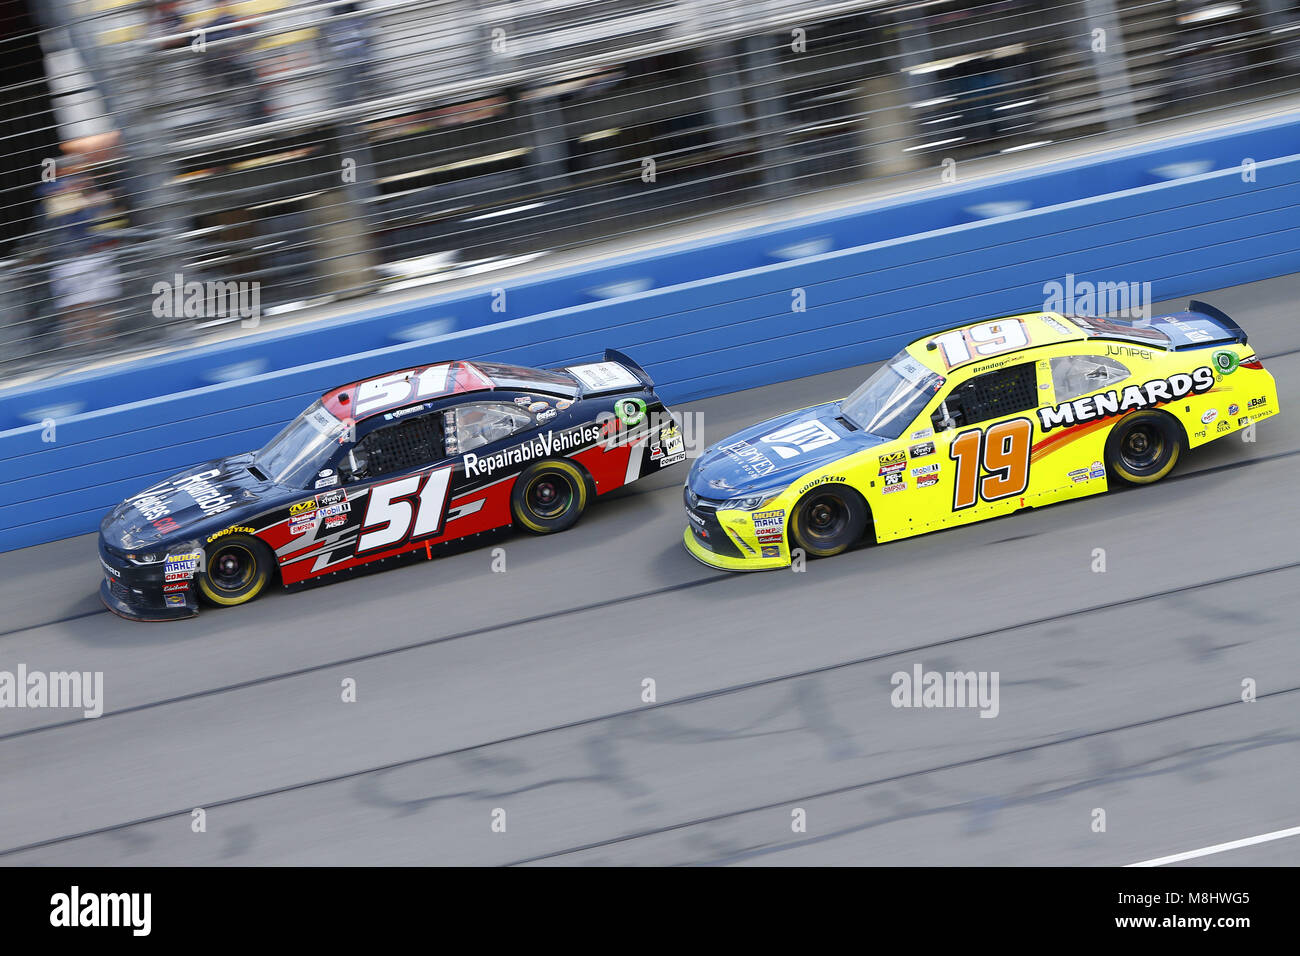 Fontana, California, USA. 17th Mar, 2018. March 17, 2018 - Fontana, California, USA: Jeremy Clements (51) and Brandon Jones (19) battle for position during the Roseanne 300 at Auto Club Speedway in Fontana, California. Credit: Chris Owens Asp Inc/ASP/ZUMA Wire/Alamy Live News Stock Photo